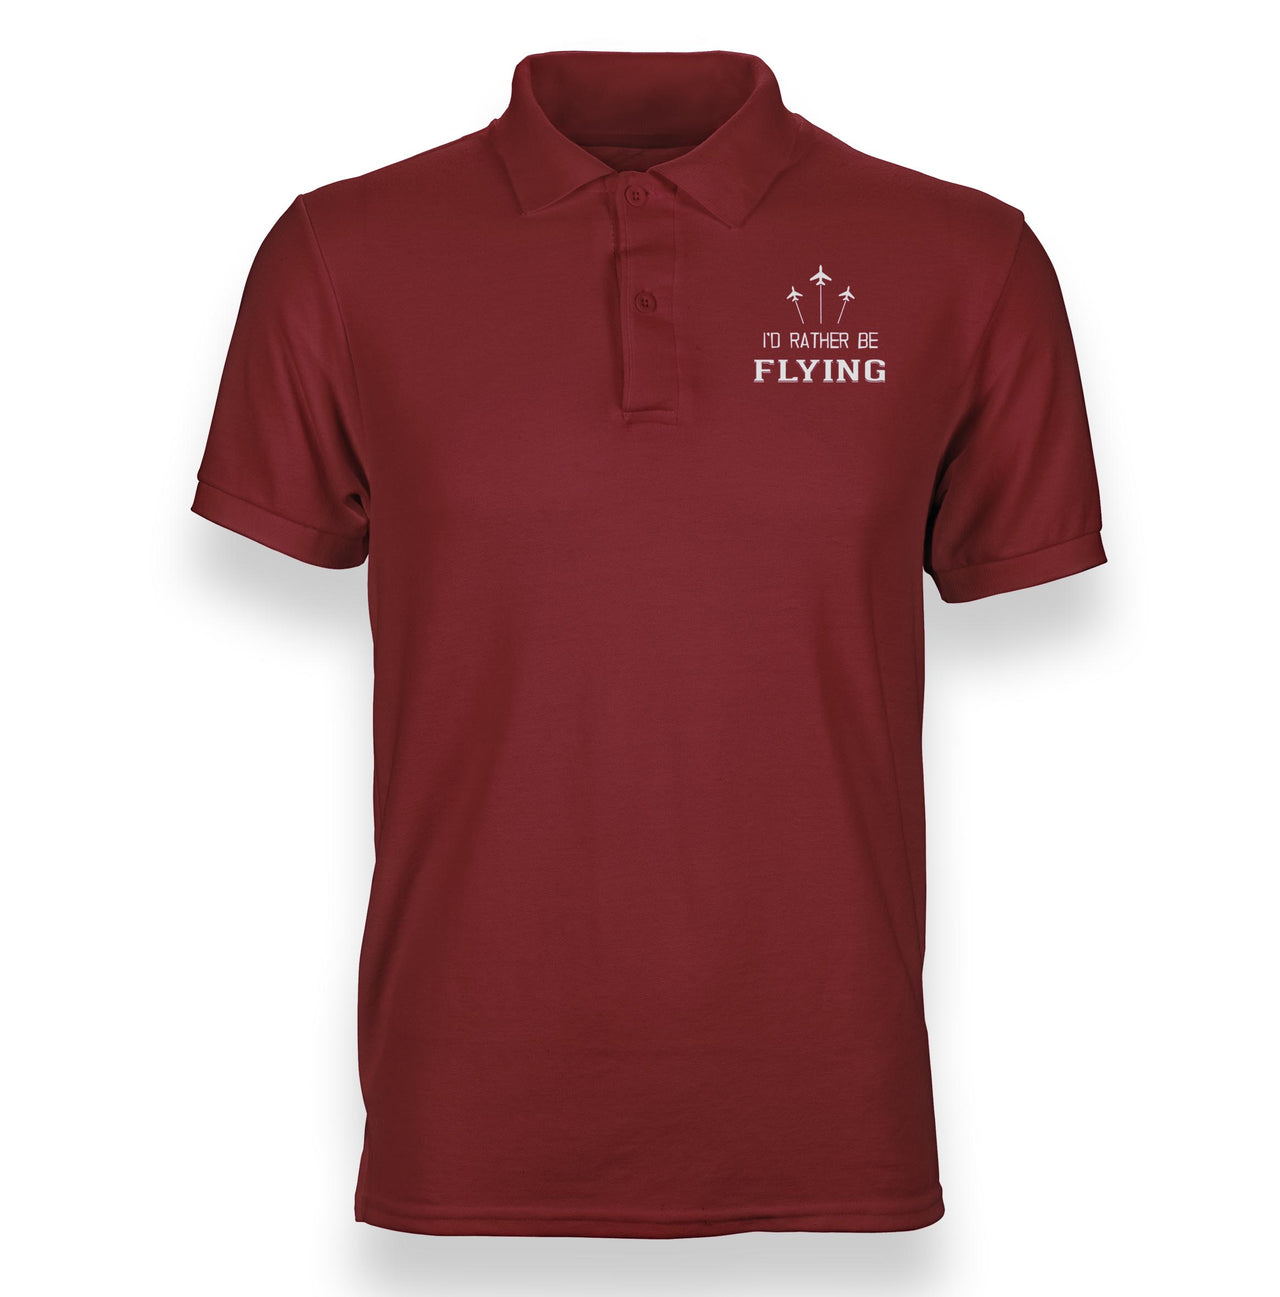 I'D Rather Be Flying Designed Polo T-Shirts